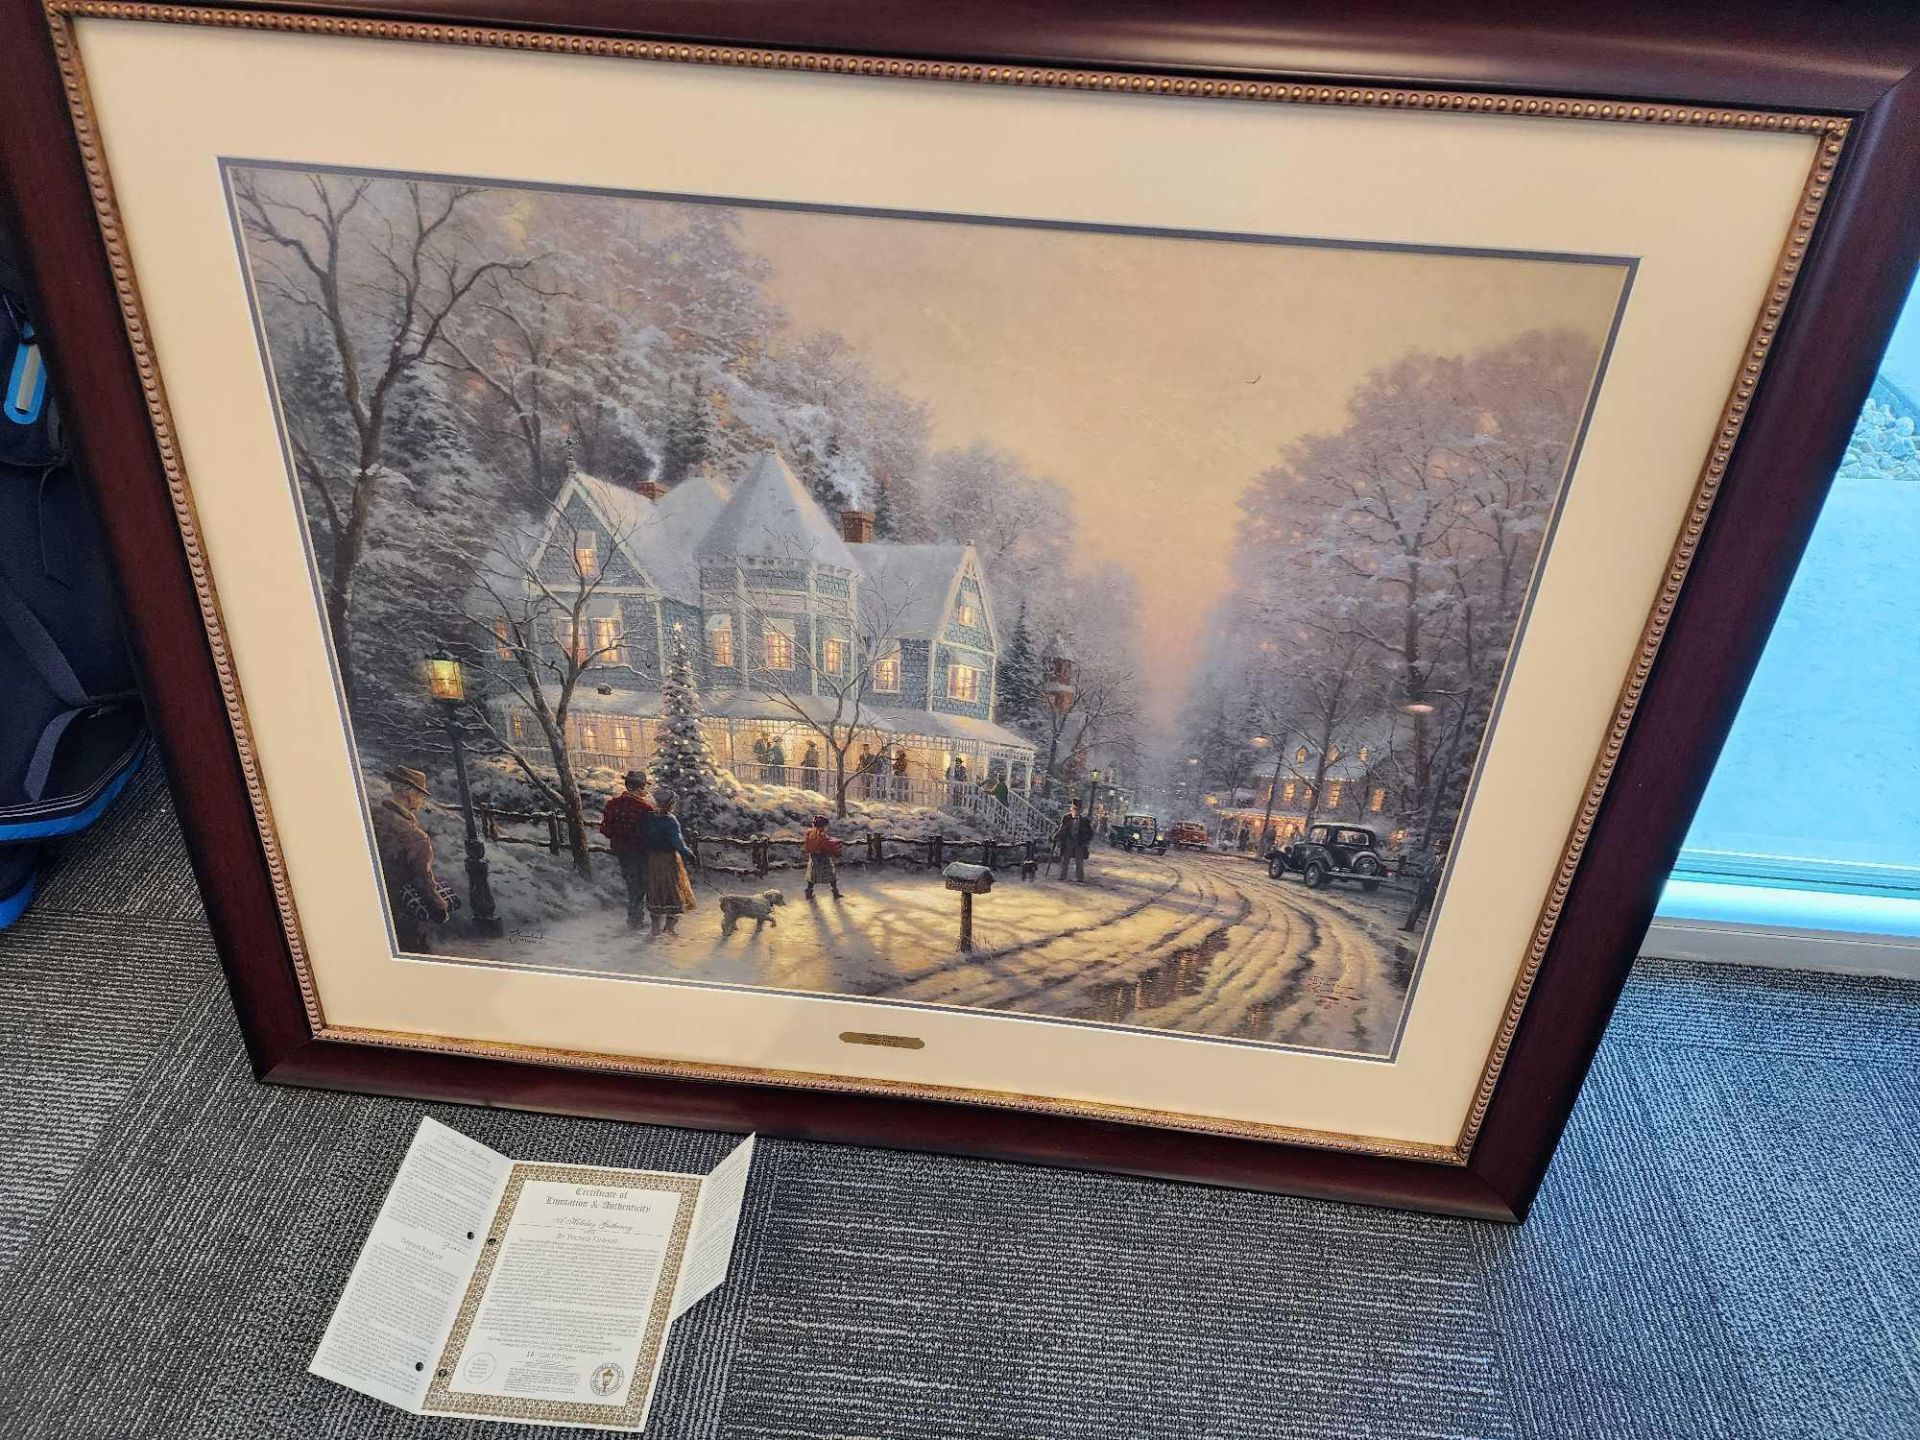 A Holiday Gathering by Thomas Kinkade 25x34. with frame and certificate